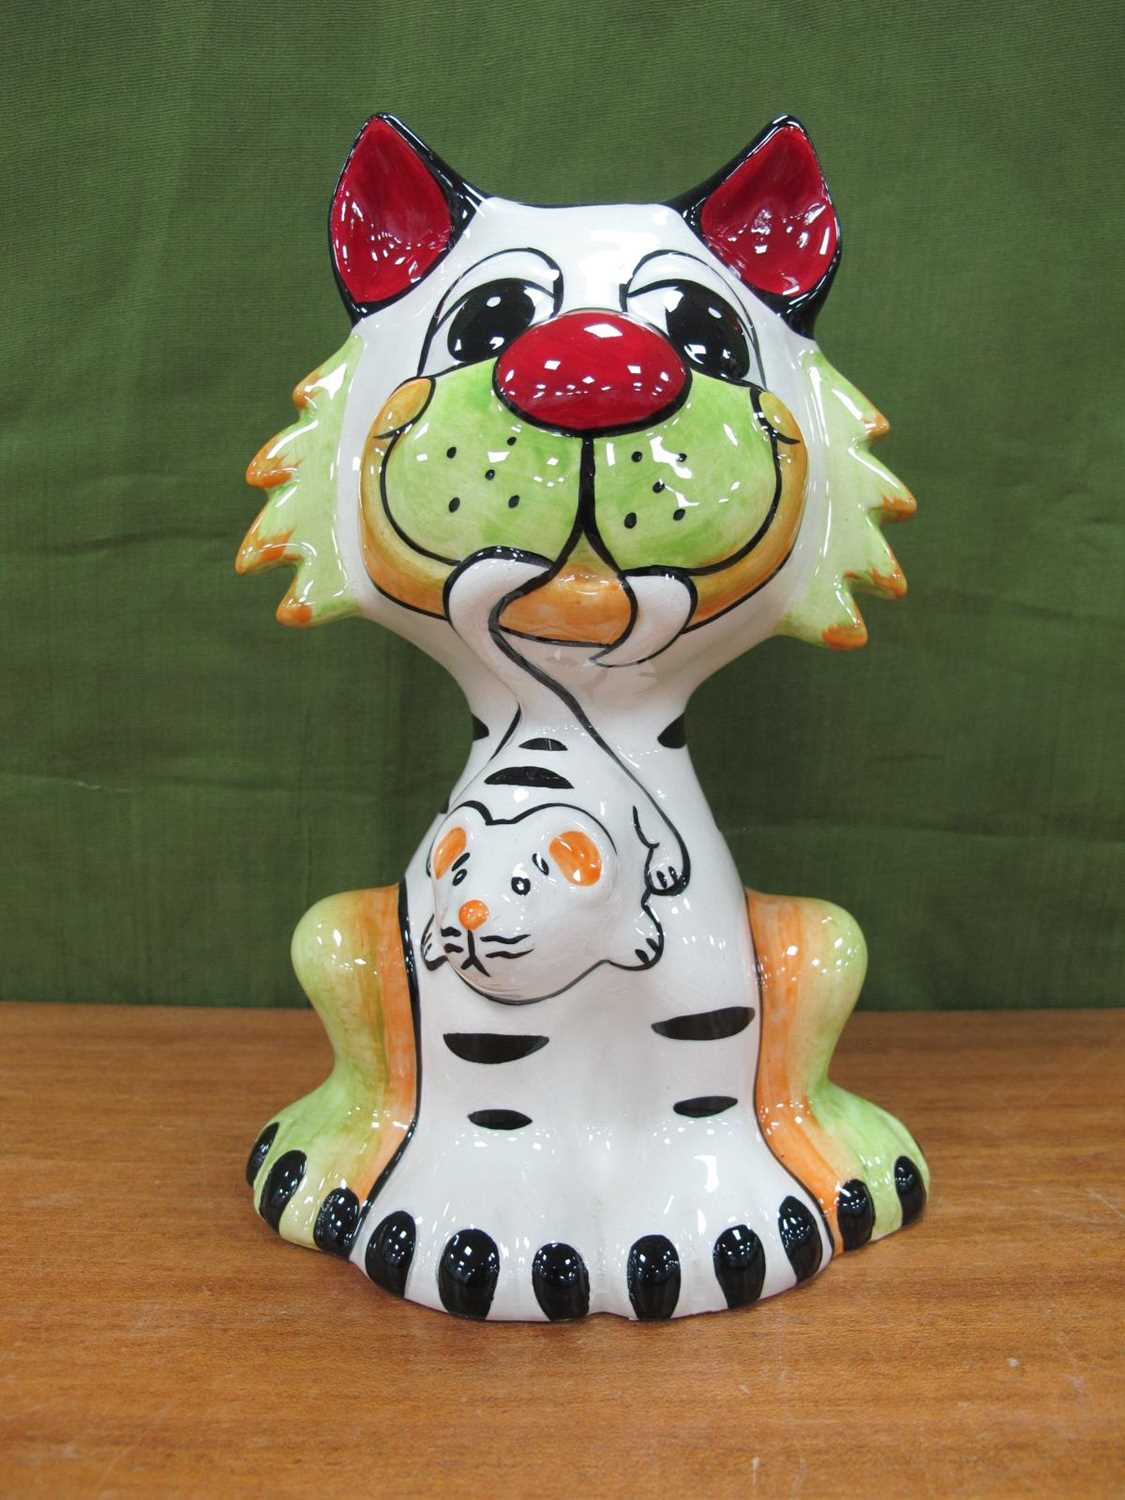 Lorna Bailey - A Large Model of Fireside The Ratchatcher Cat, limited edition No 1/1, 20cm high.